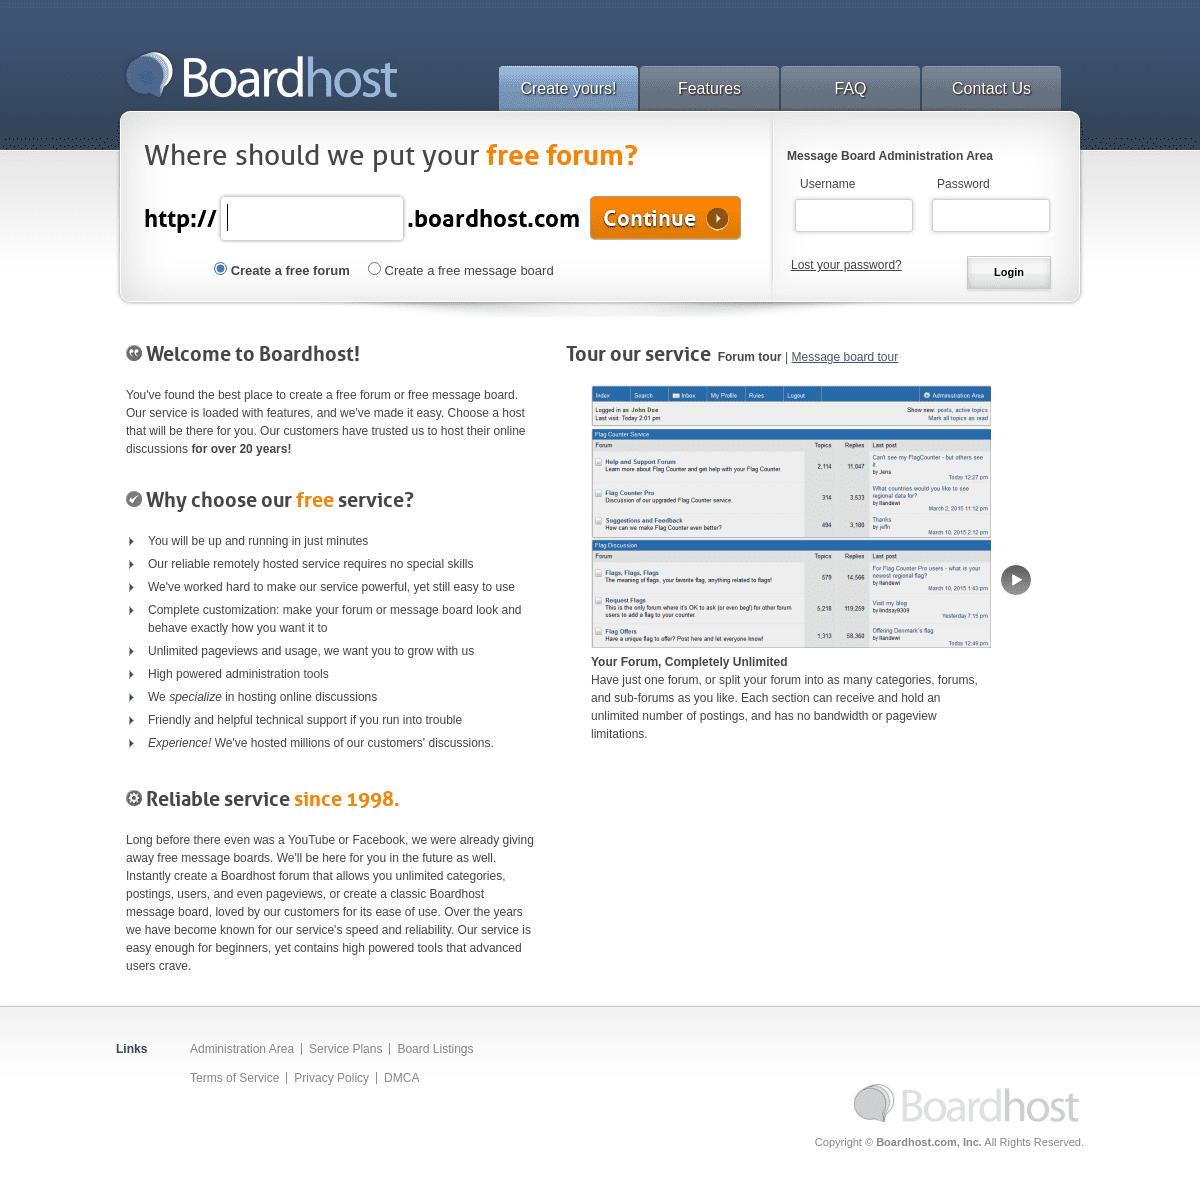 A complete backup of https://boardhost.com